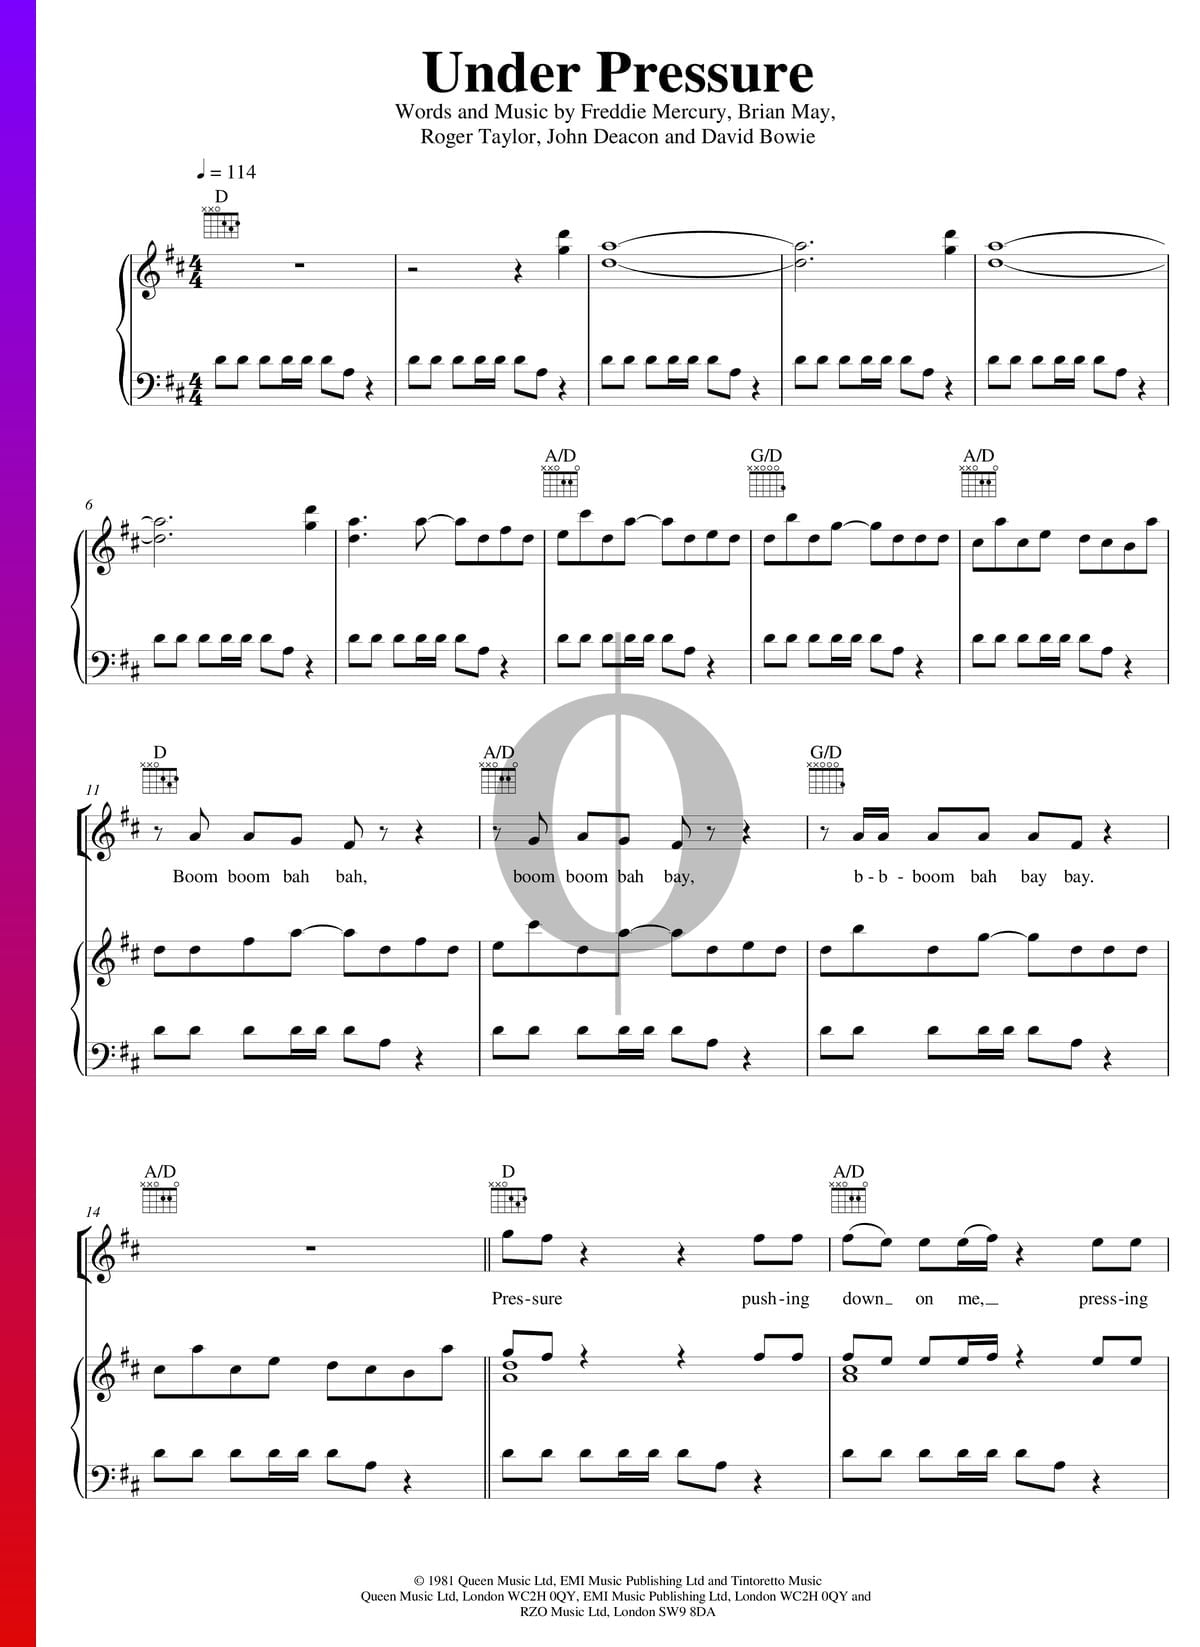 Queen & David Bowie: Under Pressure sheet music for voice, piano